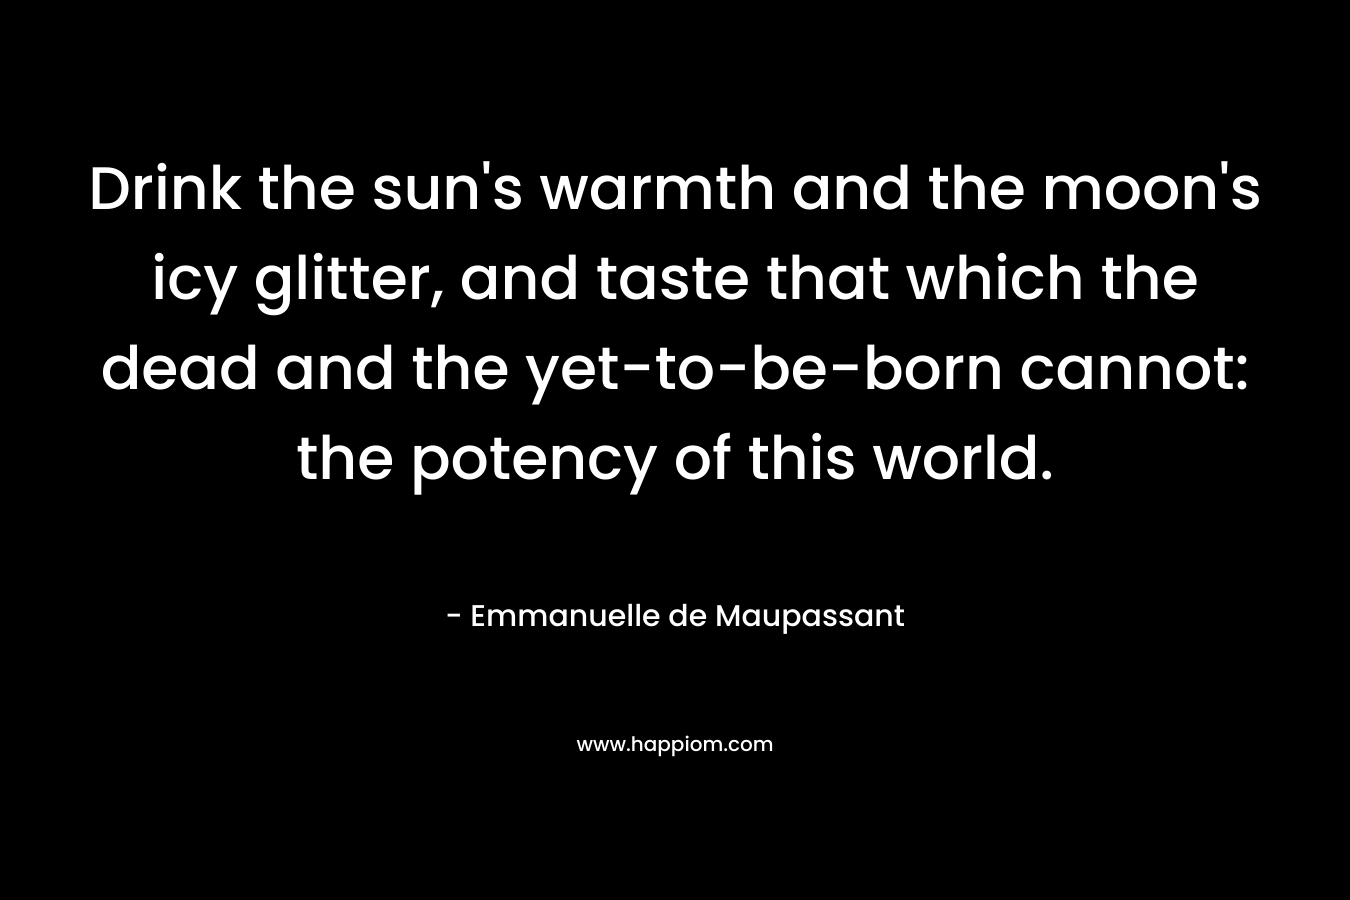 Drink the sun's warmth and the moon's icy glitter, and taste that which the dead and the yet-to-be-born cannot: the potency of this world.